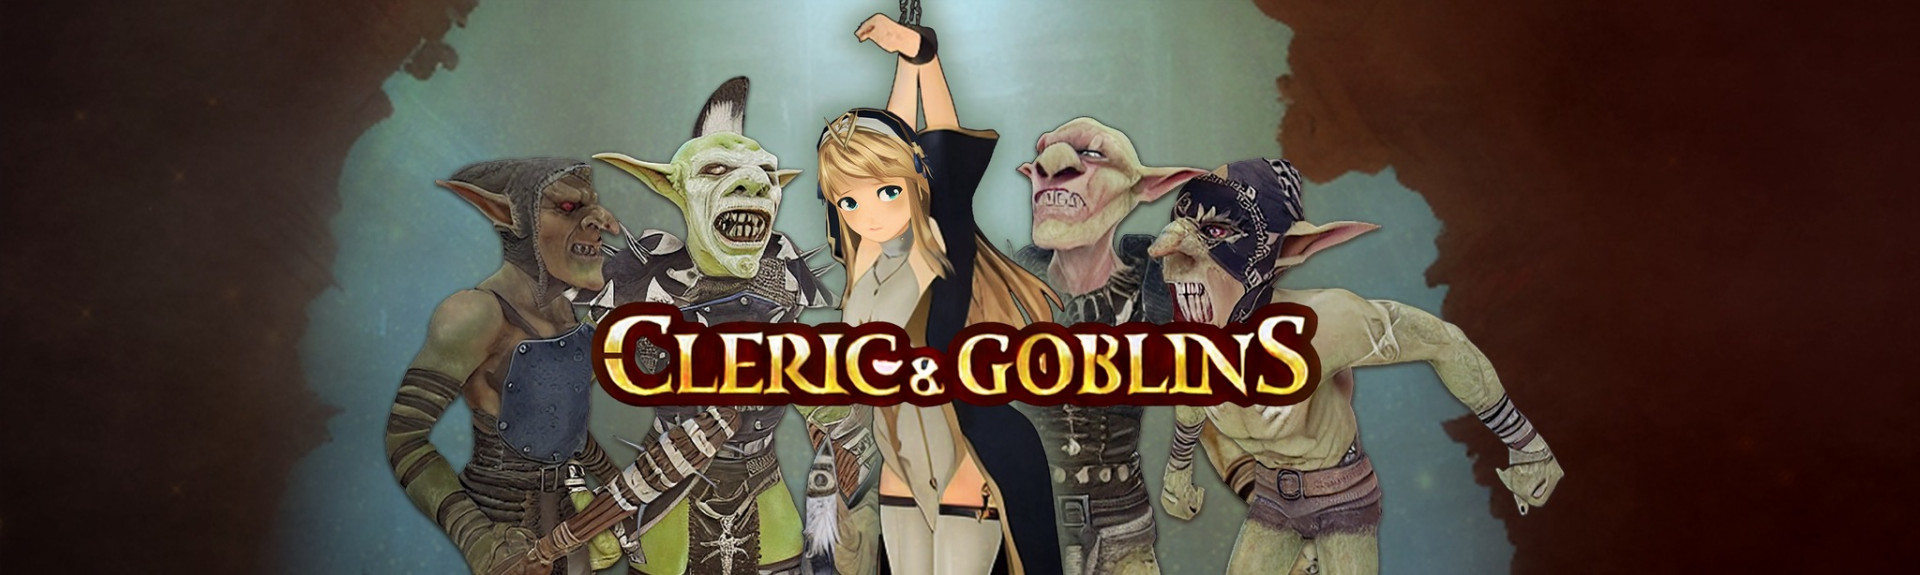 Cleric and Goblins